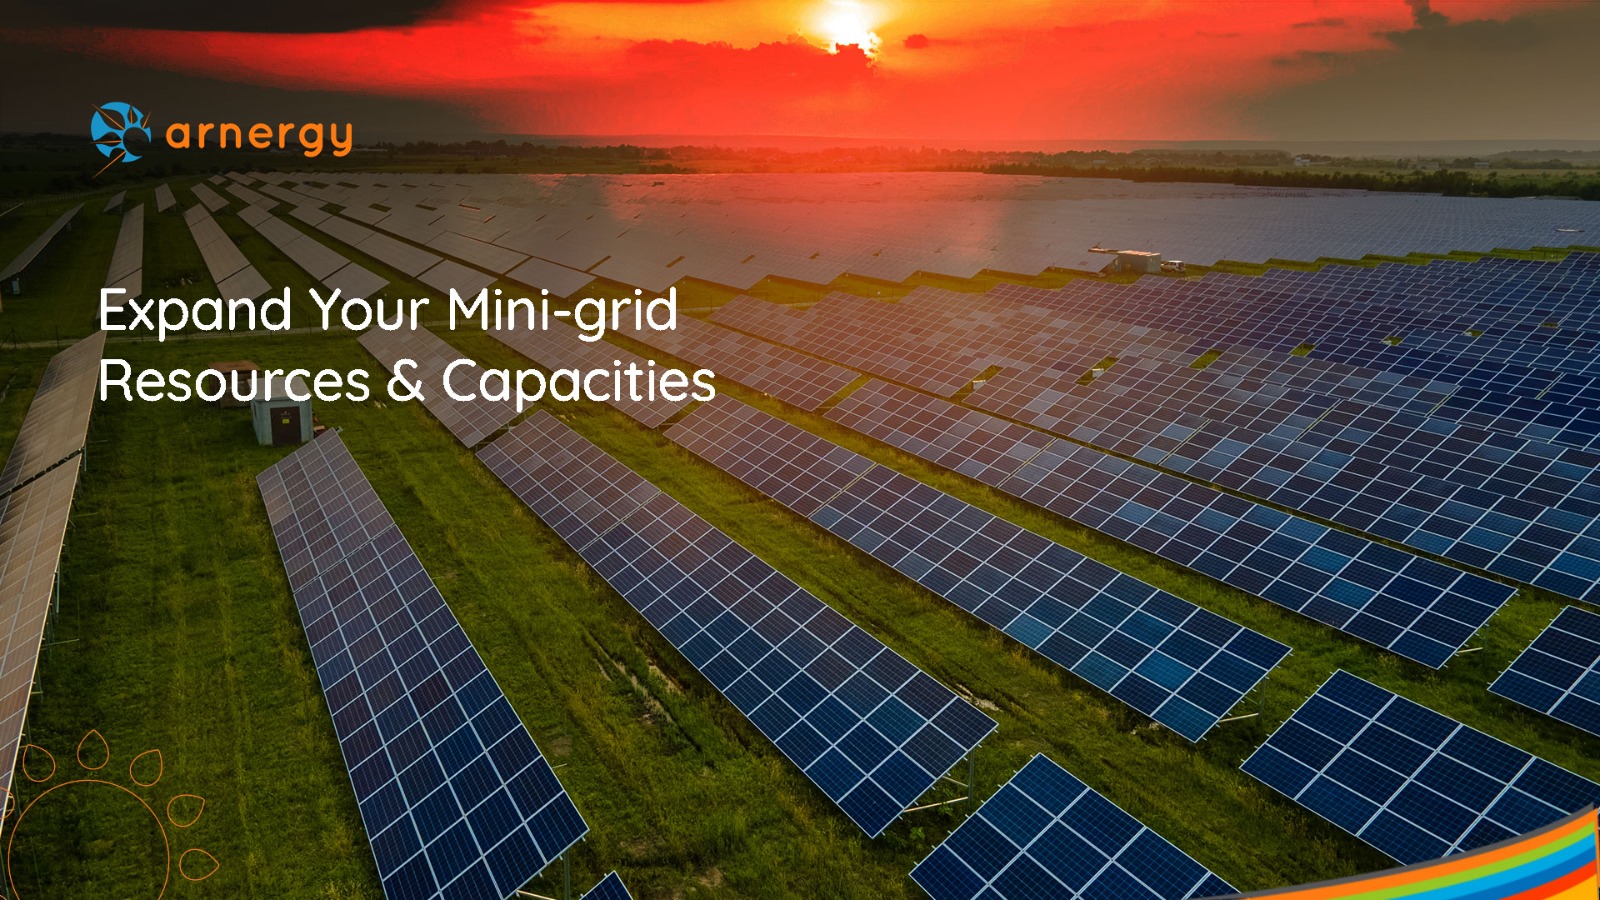 Expand Your Mini-grid Resources & Capacities